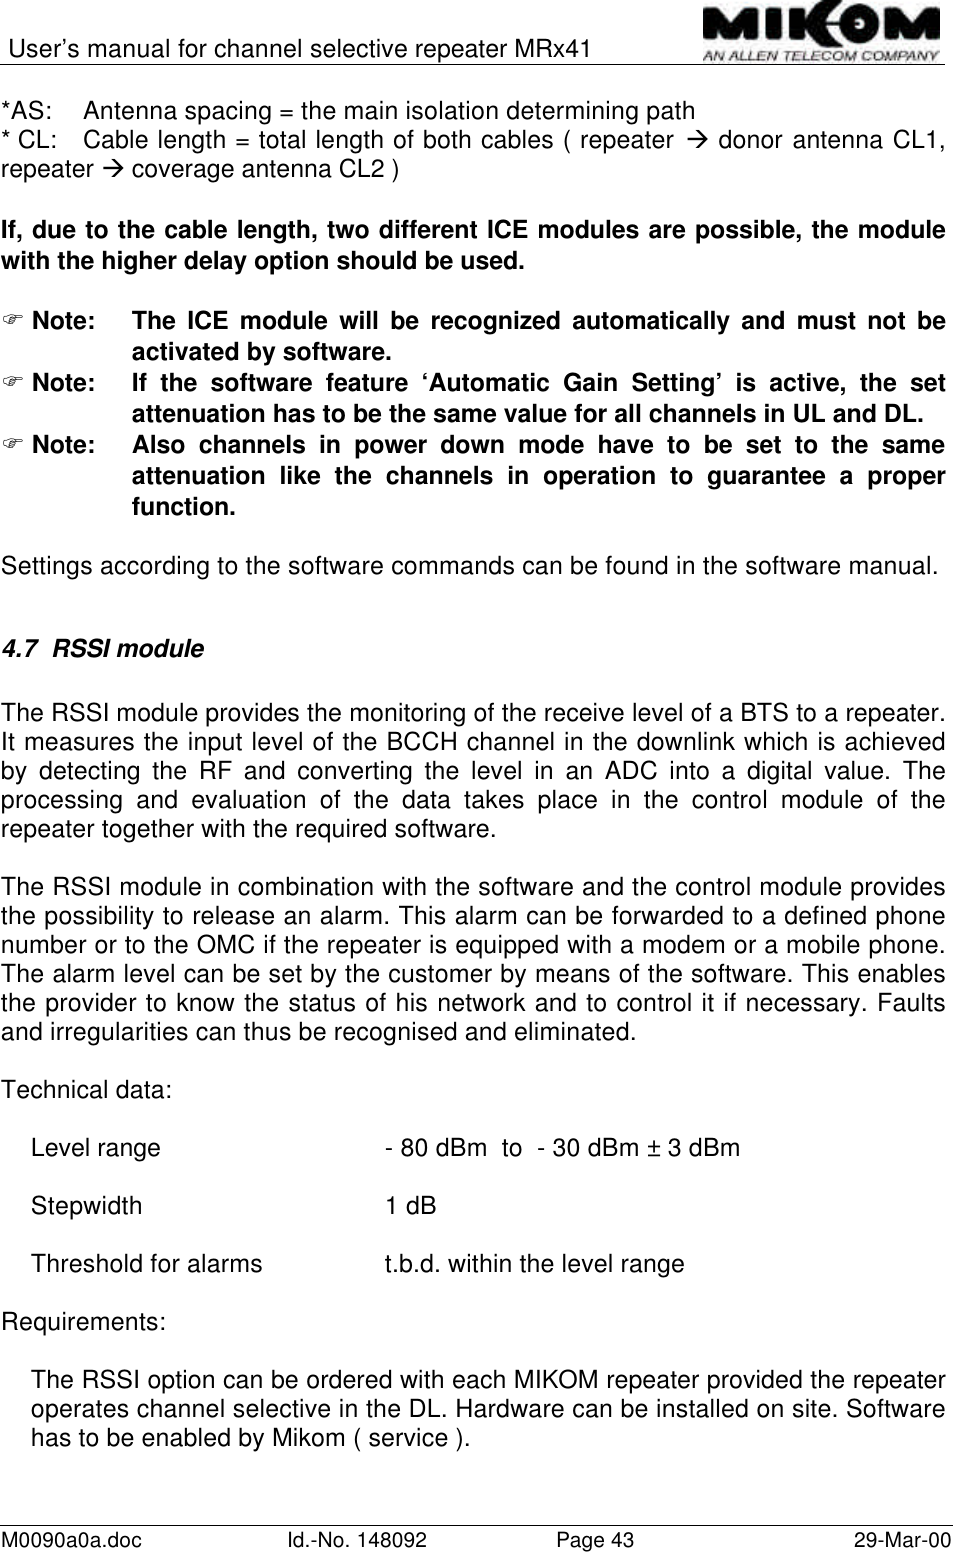 User’s manual for channel selective repeater MRx41M0090a0a.doc Id.-No. 148092 Page 43 29-Mar-00*AS: Antenna spacing = the main isolation determining path* CL: Cable length = total length of both cables ( repeater à donor antenna CL1,repeater à coverage antenna CL2 )If, due to the cable length, two different ICE modules are possible, the modulewith the higher delay option should be used.F Note: The ICE module will be recognized automatically and must not beactivated by software.F Note: If the software feature ‘Automatic Gain Setting’ is active, the setattenuation has to be the same value for all channels in UL and DL.F Note: Also channels in power down mode have to be set to the sameattenuation like the channels in operation to guarantee a properfunction.Settings according to the software commands can be found in the software manual.4.7 RSSI moduleThe RSSI module provides the monitoring of the receive level of a BTS to a repeater.It measures the input level of the BCCH channel in the downlink which is achievedby detecting the RF and converting the level in an ADC into a digital value. Theprocessing and evaluation of the data takes place in the control module of therepeater together with the required software.The RSSI module in combination with the software and the control module providesthe possibility to release an alarm. This alarm can be forwarded to a defined phonenumber or to the OMC if the repeater is equipped with a modem or a mobile phone.The alarm level can be set by the customer by means of the software. This enablesthe provider to know the status of his network and to control it if necessary. Faultsand irregularities can thus be recognised and eliminated.Technical data:Level range - 80 dBm  to  - 30 dBm ± 3 dBmStepwidth 1 dBThreshold for alarms t.b.d. within the level rangeRequirements:The RSSI option can be ordered with each MIKOM repeater provided the repeateroperates channel selective in the DL. Hardware can be installed on site. Softwarehas to be enabled by Mikom ( service ).